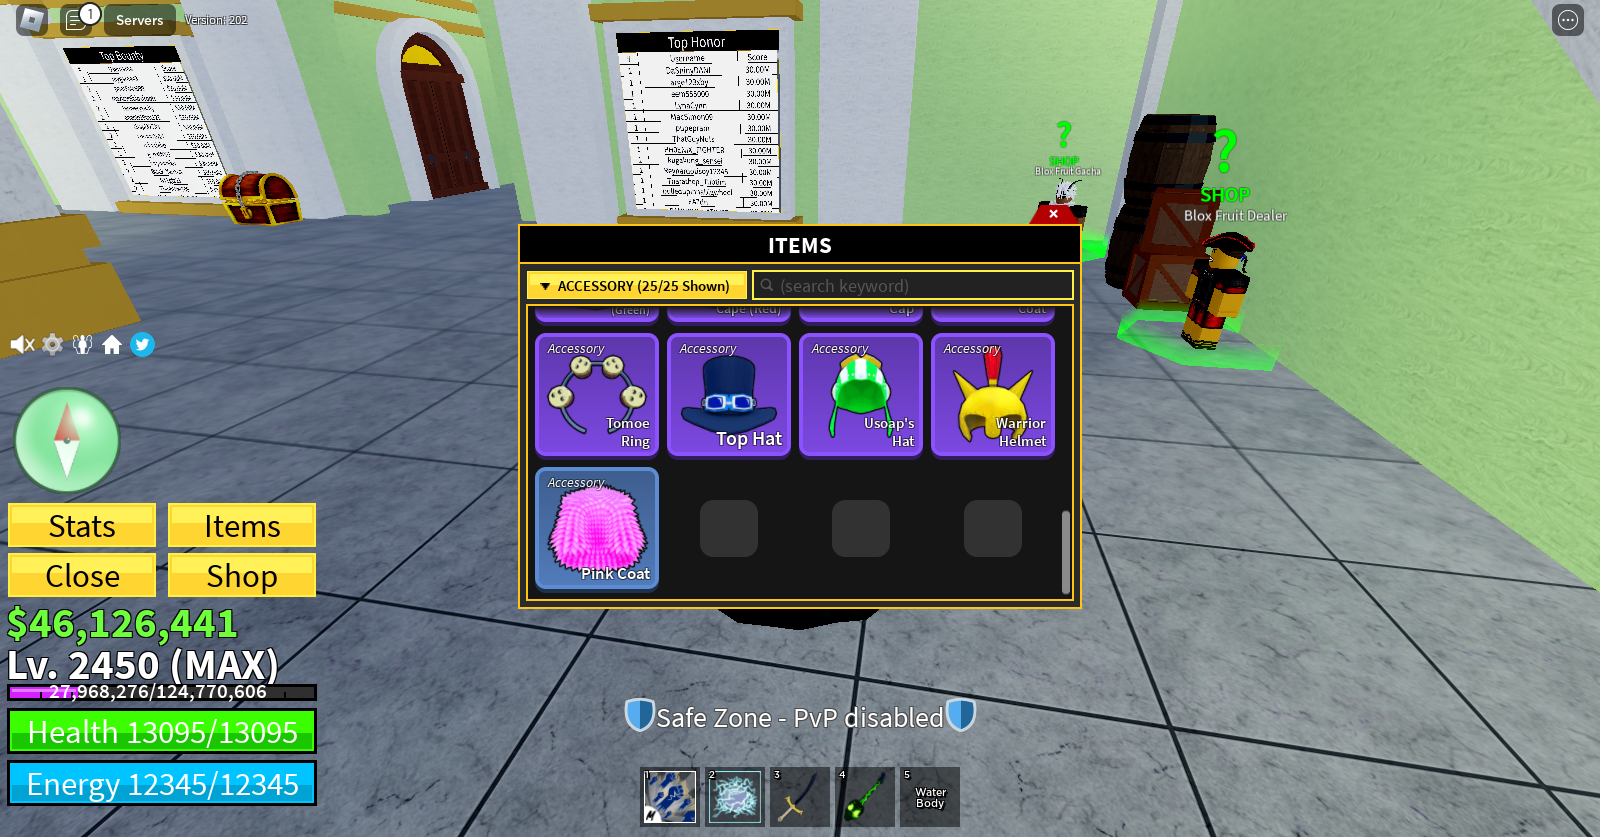 SOLD - Top Tier Handmade Blox Fruits Account 100% Game Completed - $1000  (Negotiable) - EpicNPC